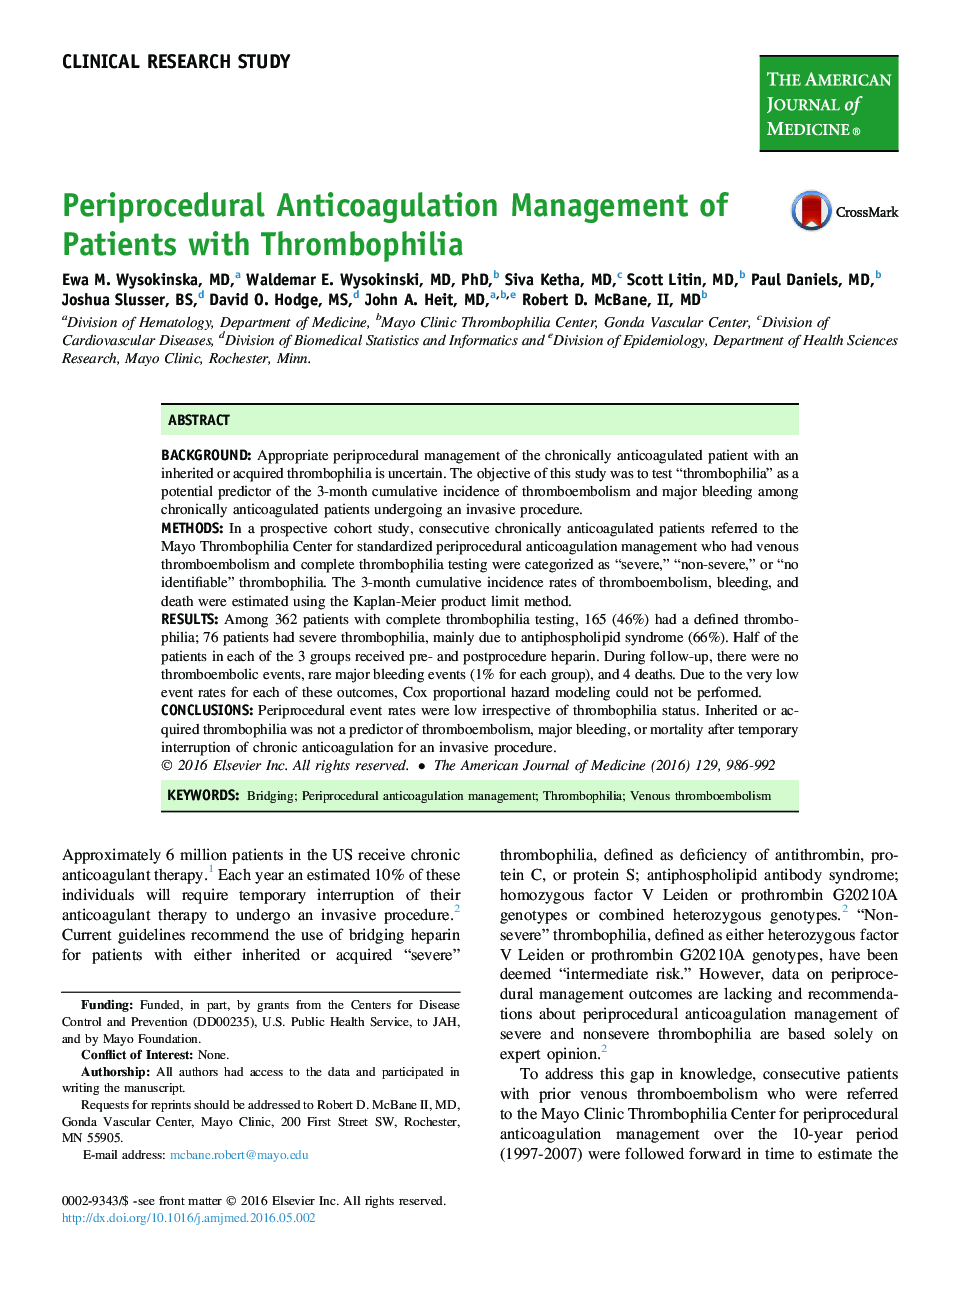 Periprocedural Anticoagulation Management of Patients with Thrombophilia 